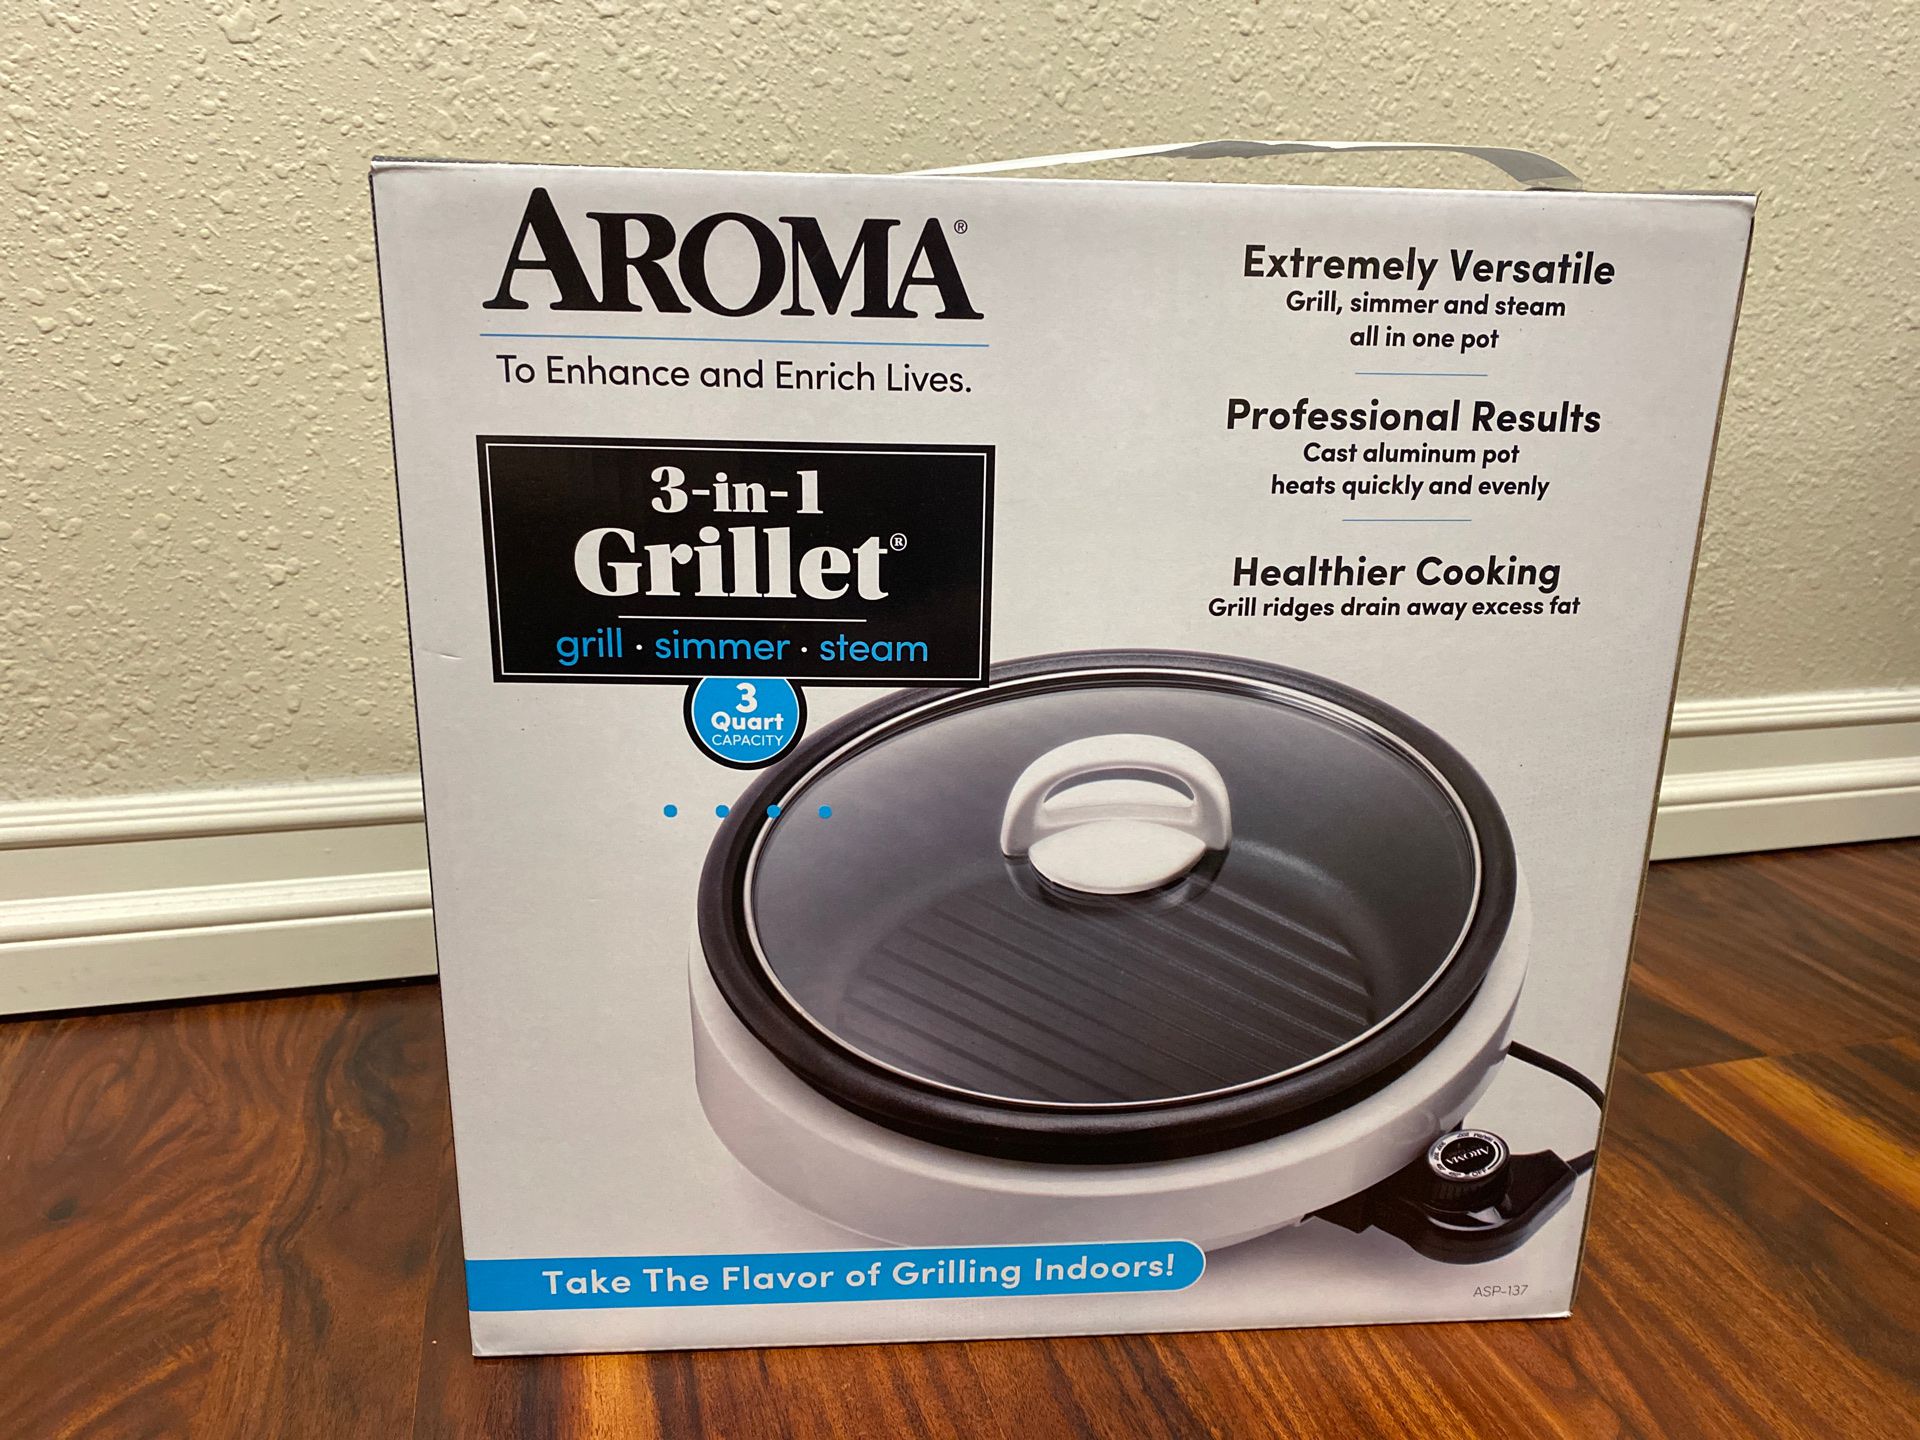 Aroma 3 in 1 Grill Skillet Grillet